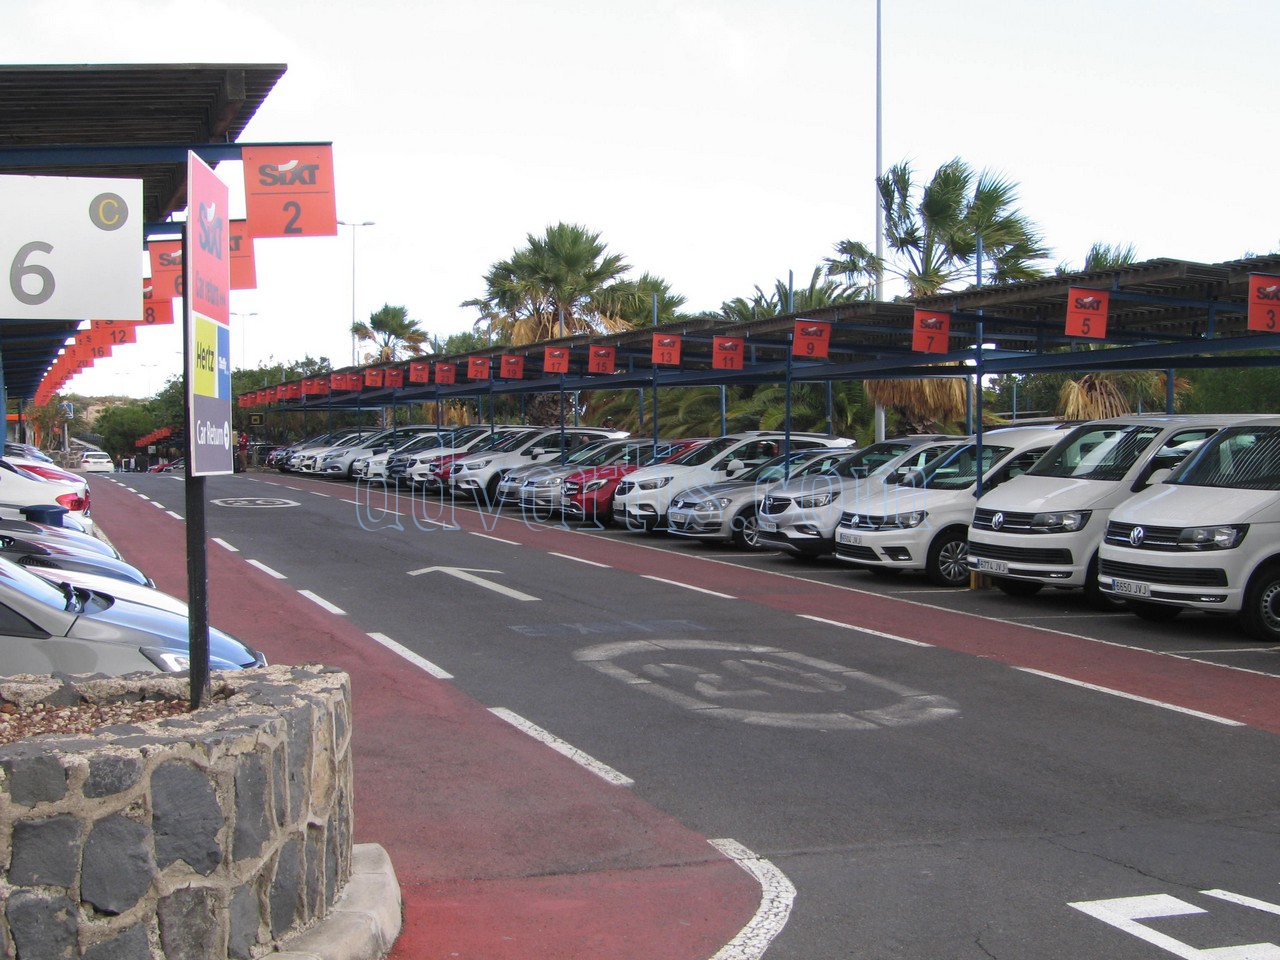 Car hire Tenerife airport south Sixt